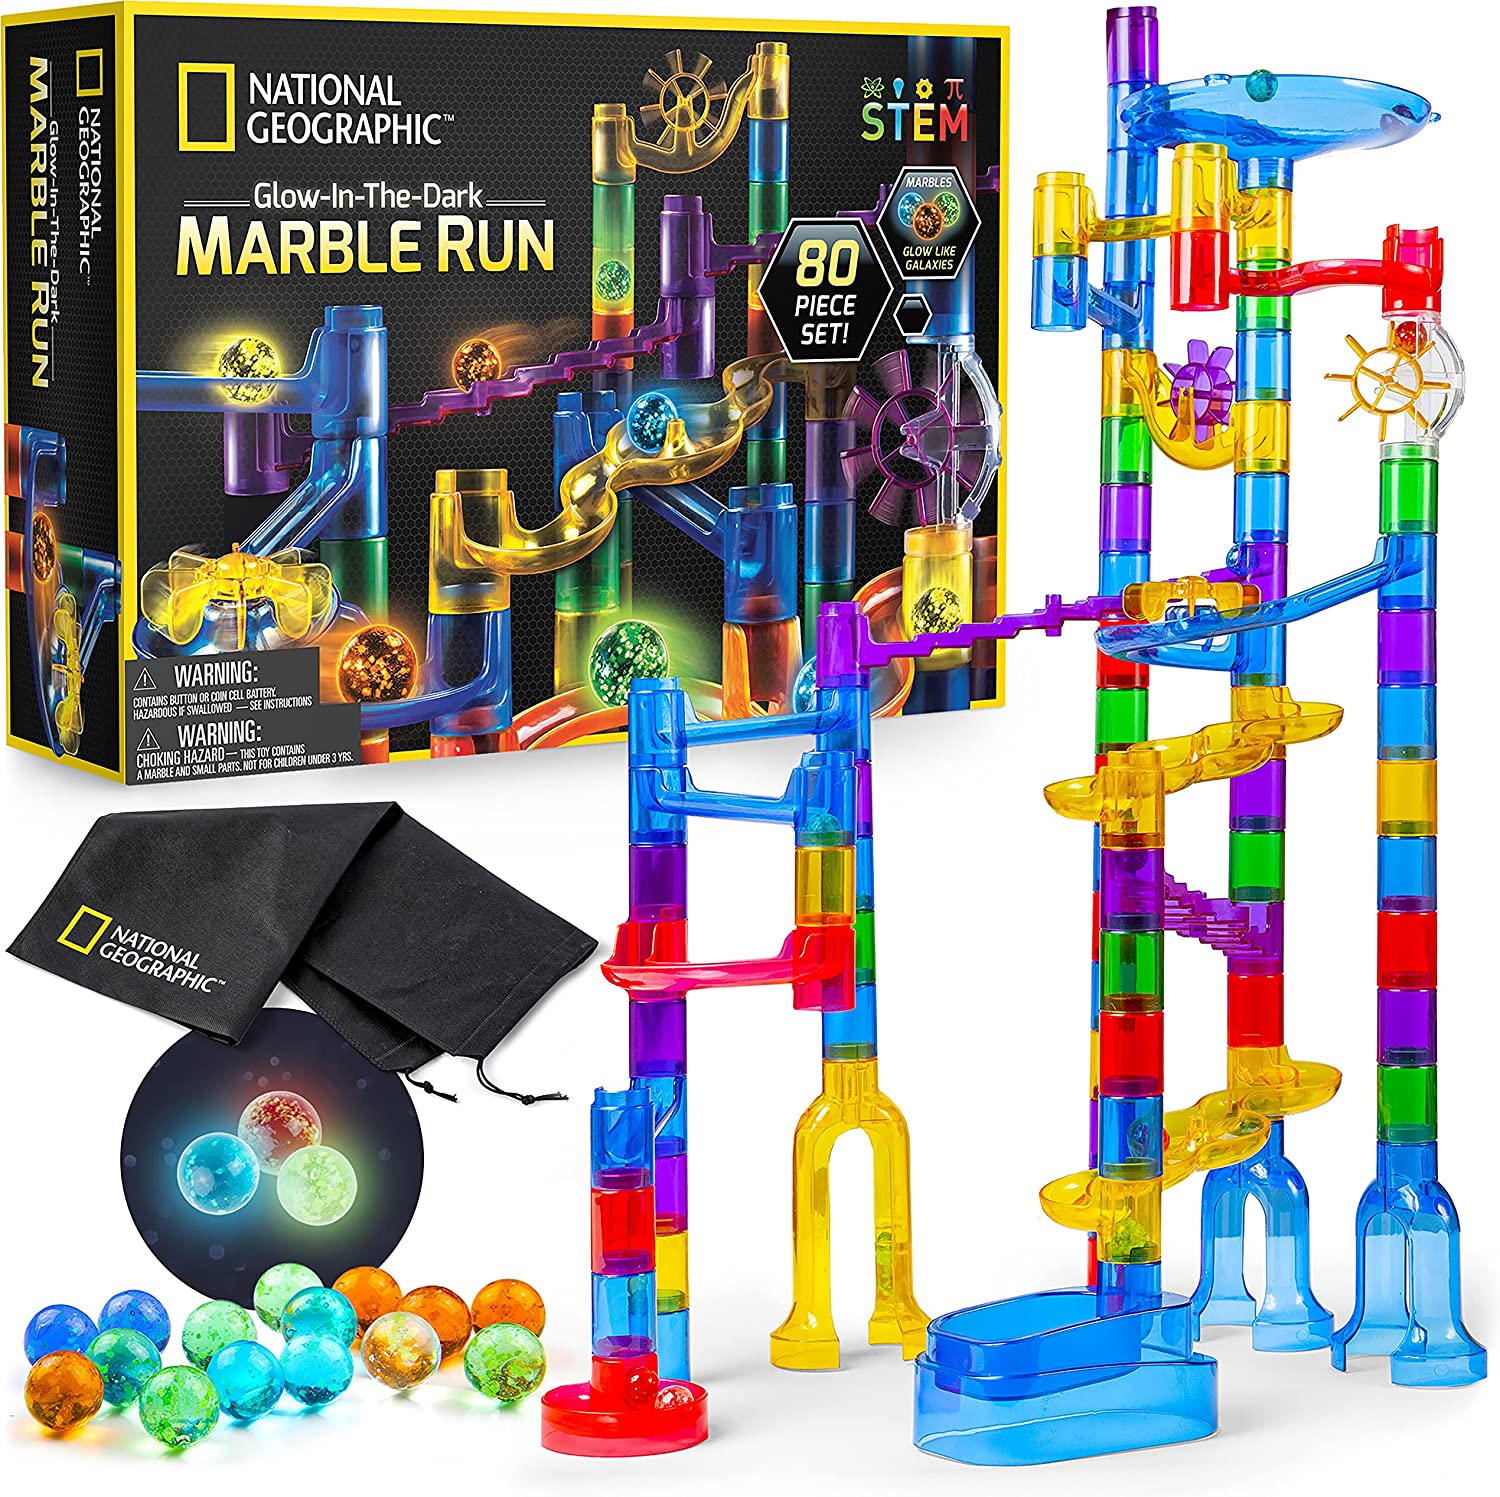 NATIONAL GEOGRAPHIC Glowing Pack & Store Marble Run, 80-Piece